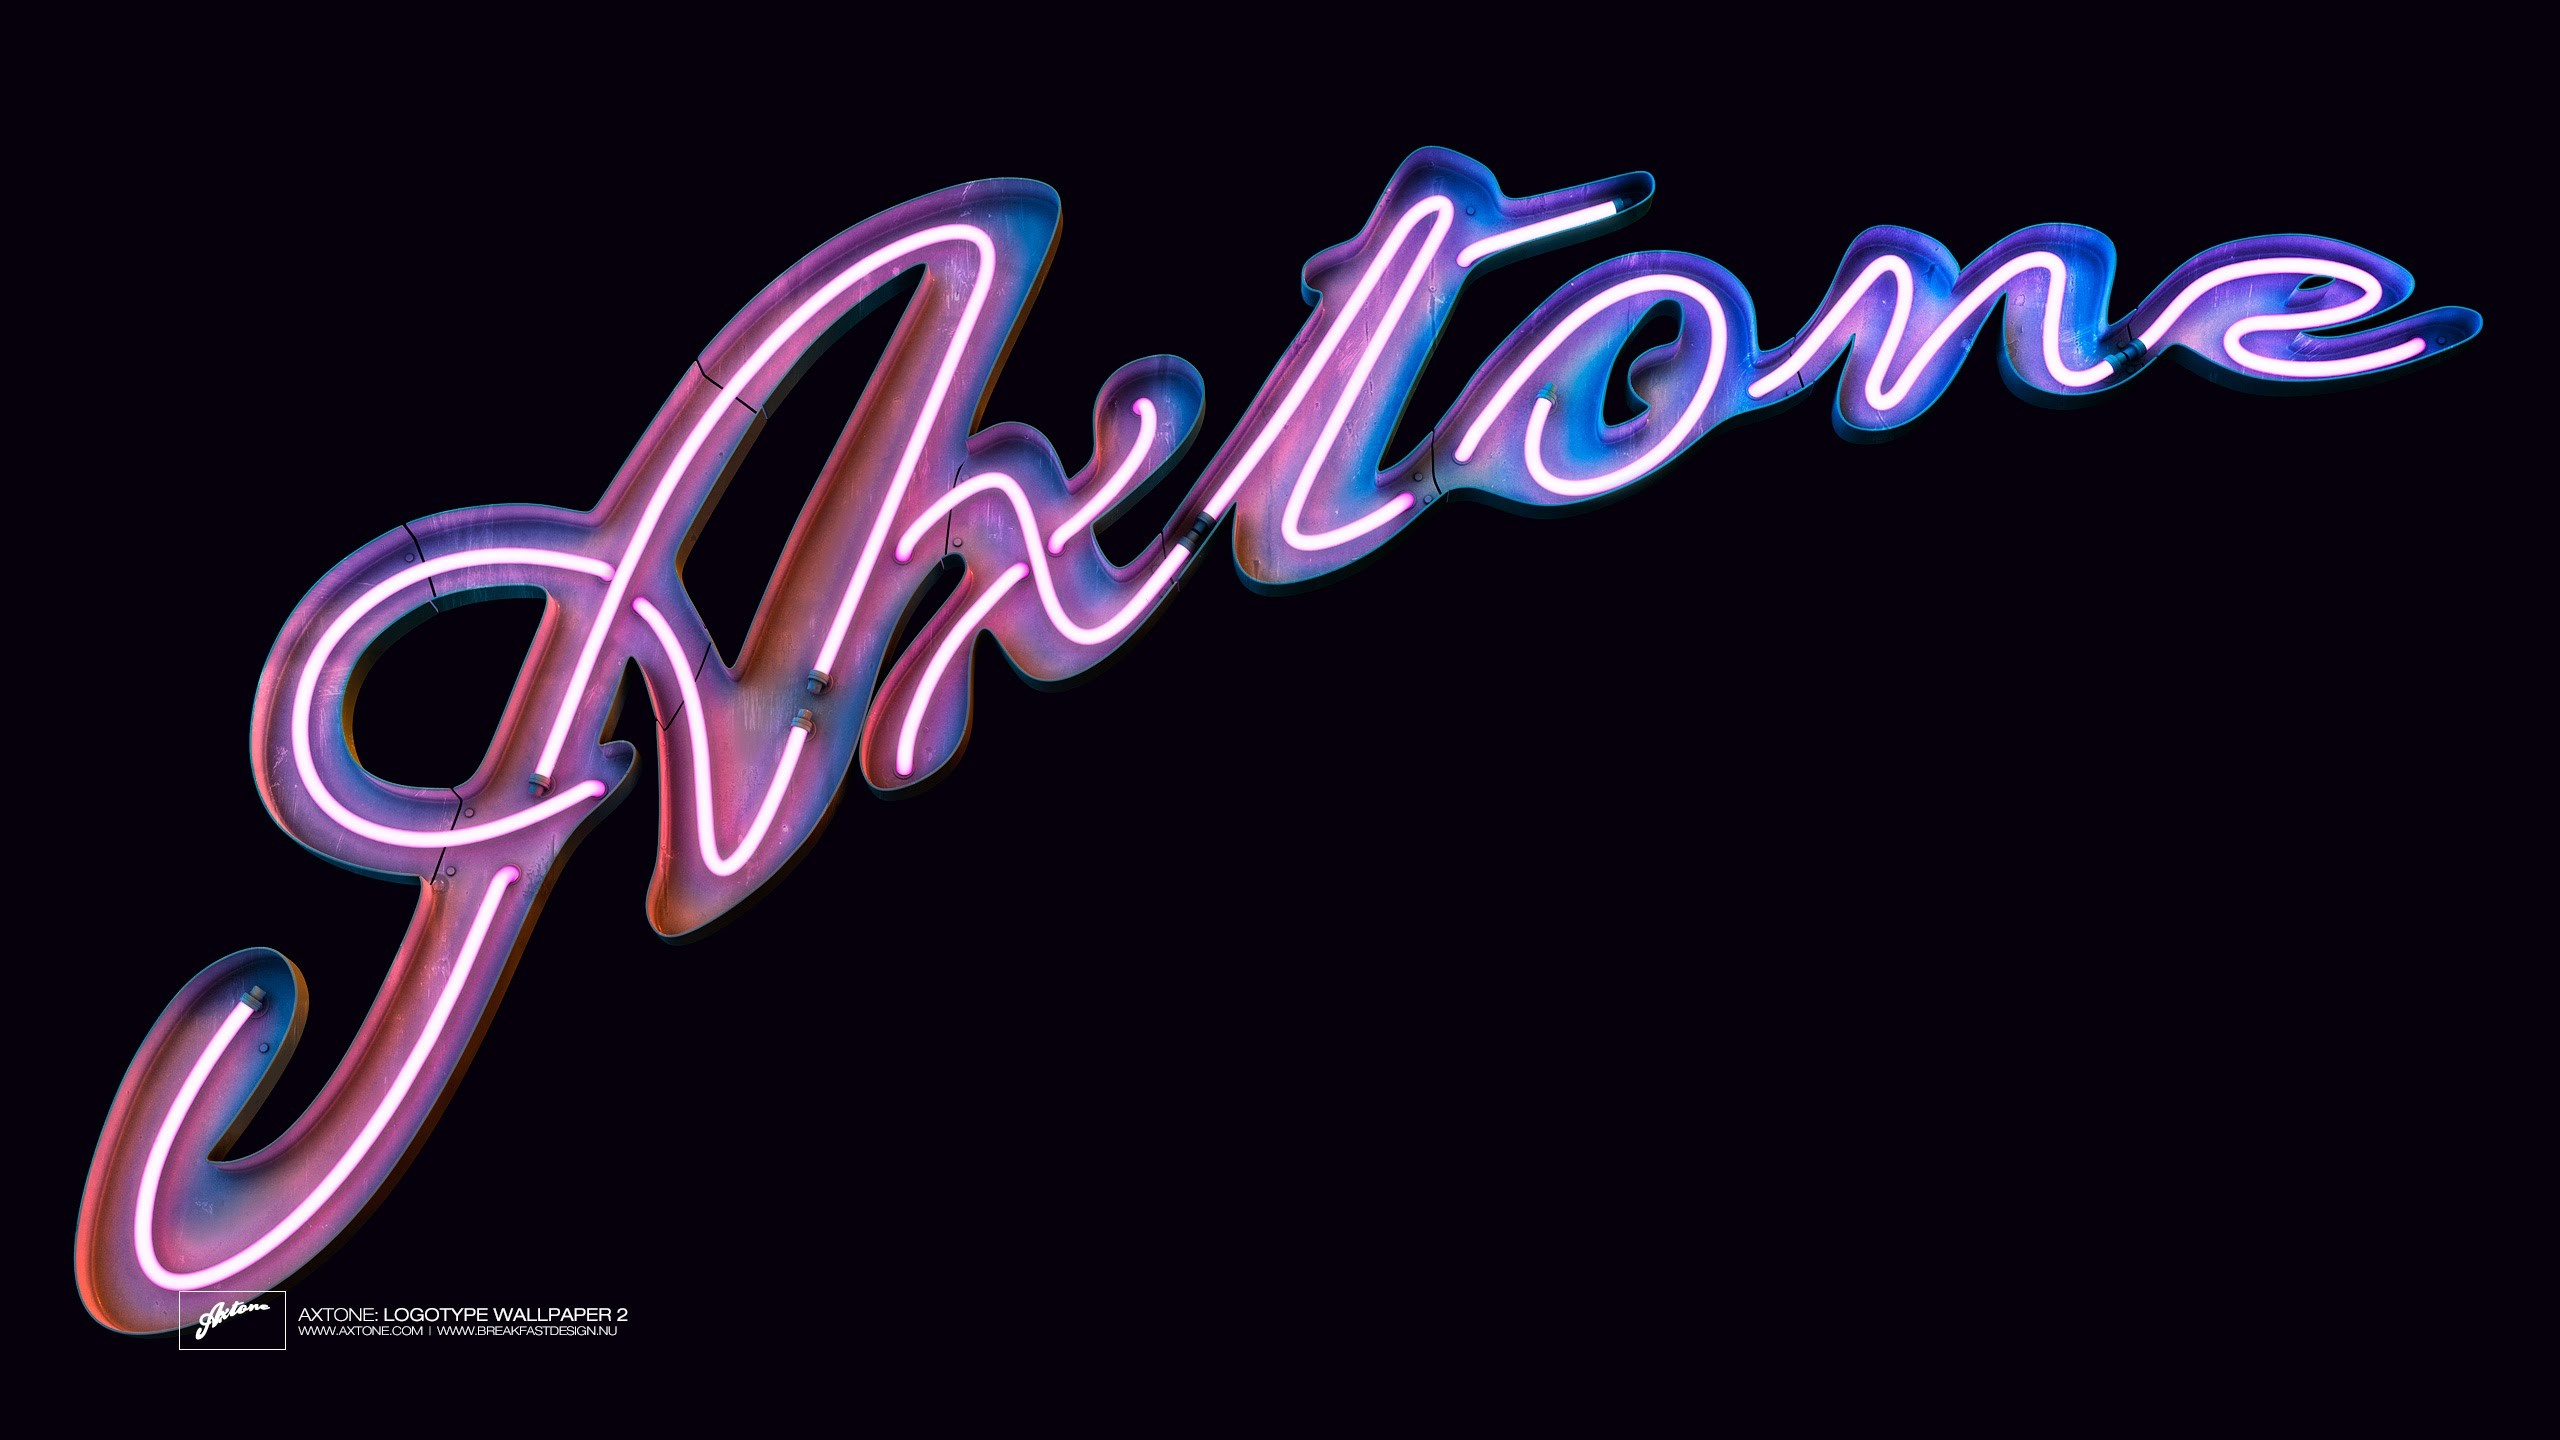 Axtone Album Covers Simple Background Black Background 2560x1440